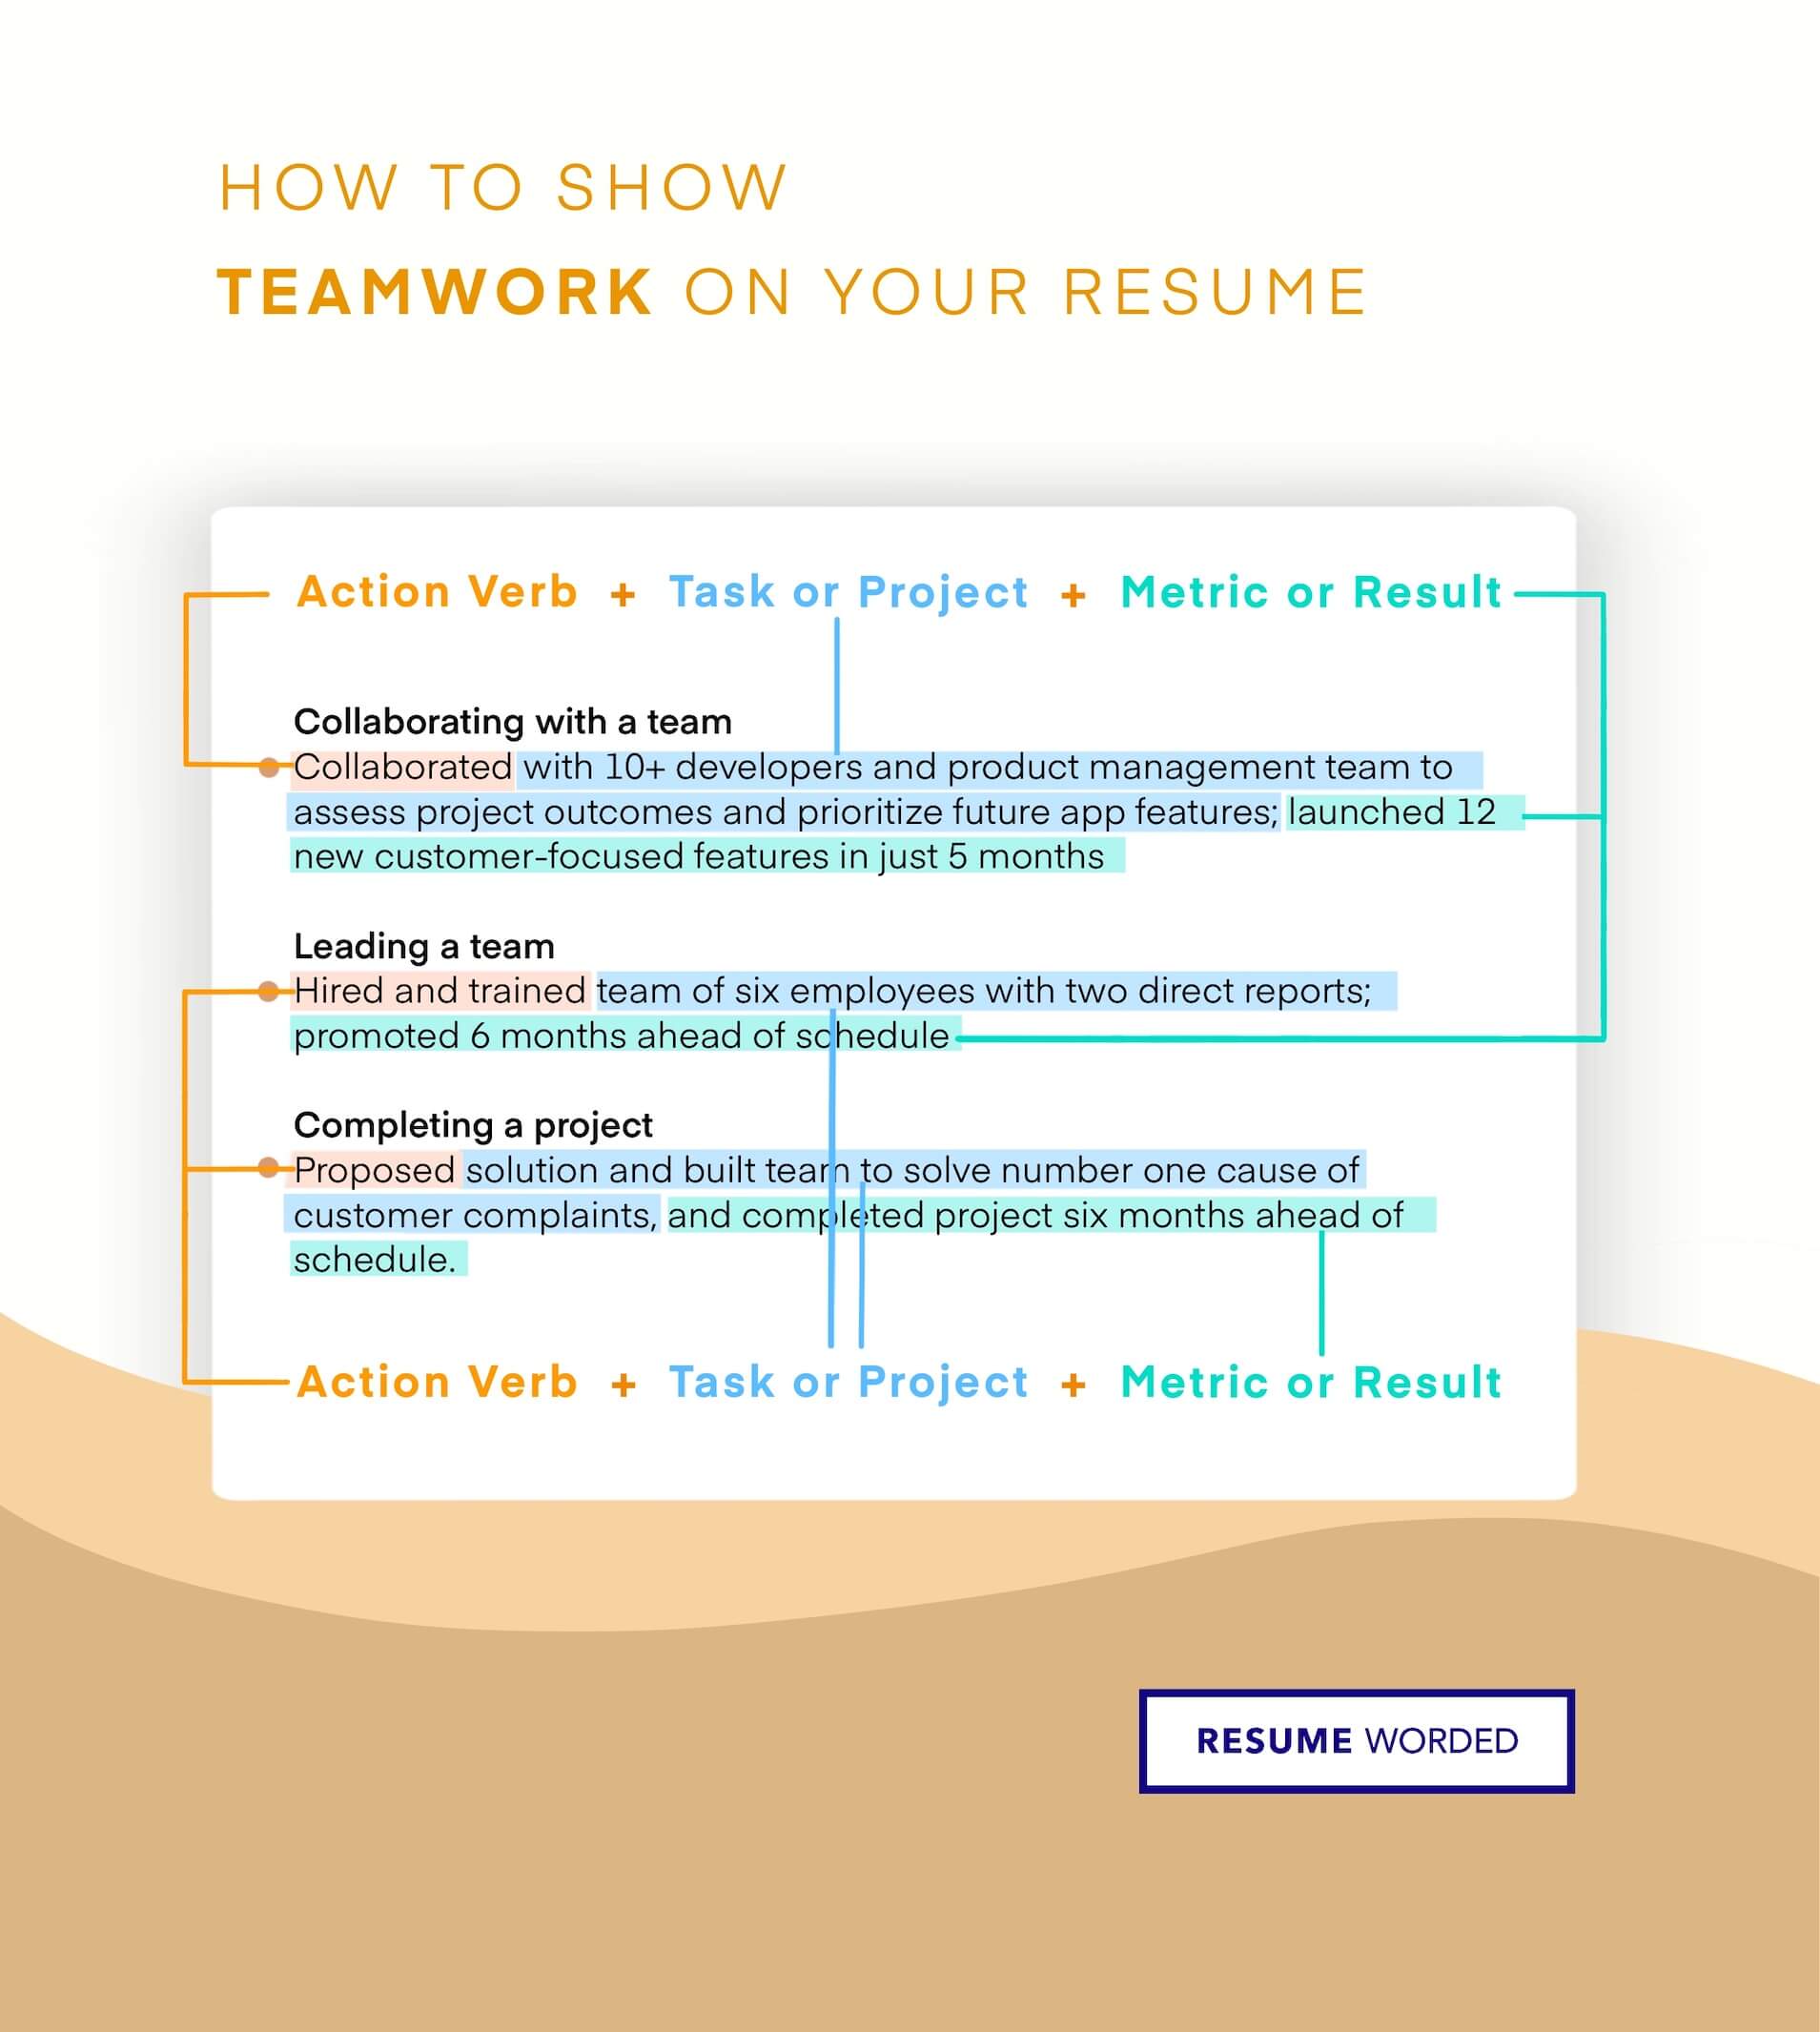 Demonstrate your ability to manage work teams - Senior Process Specialist Resume